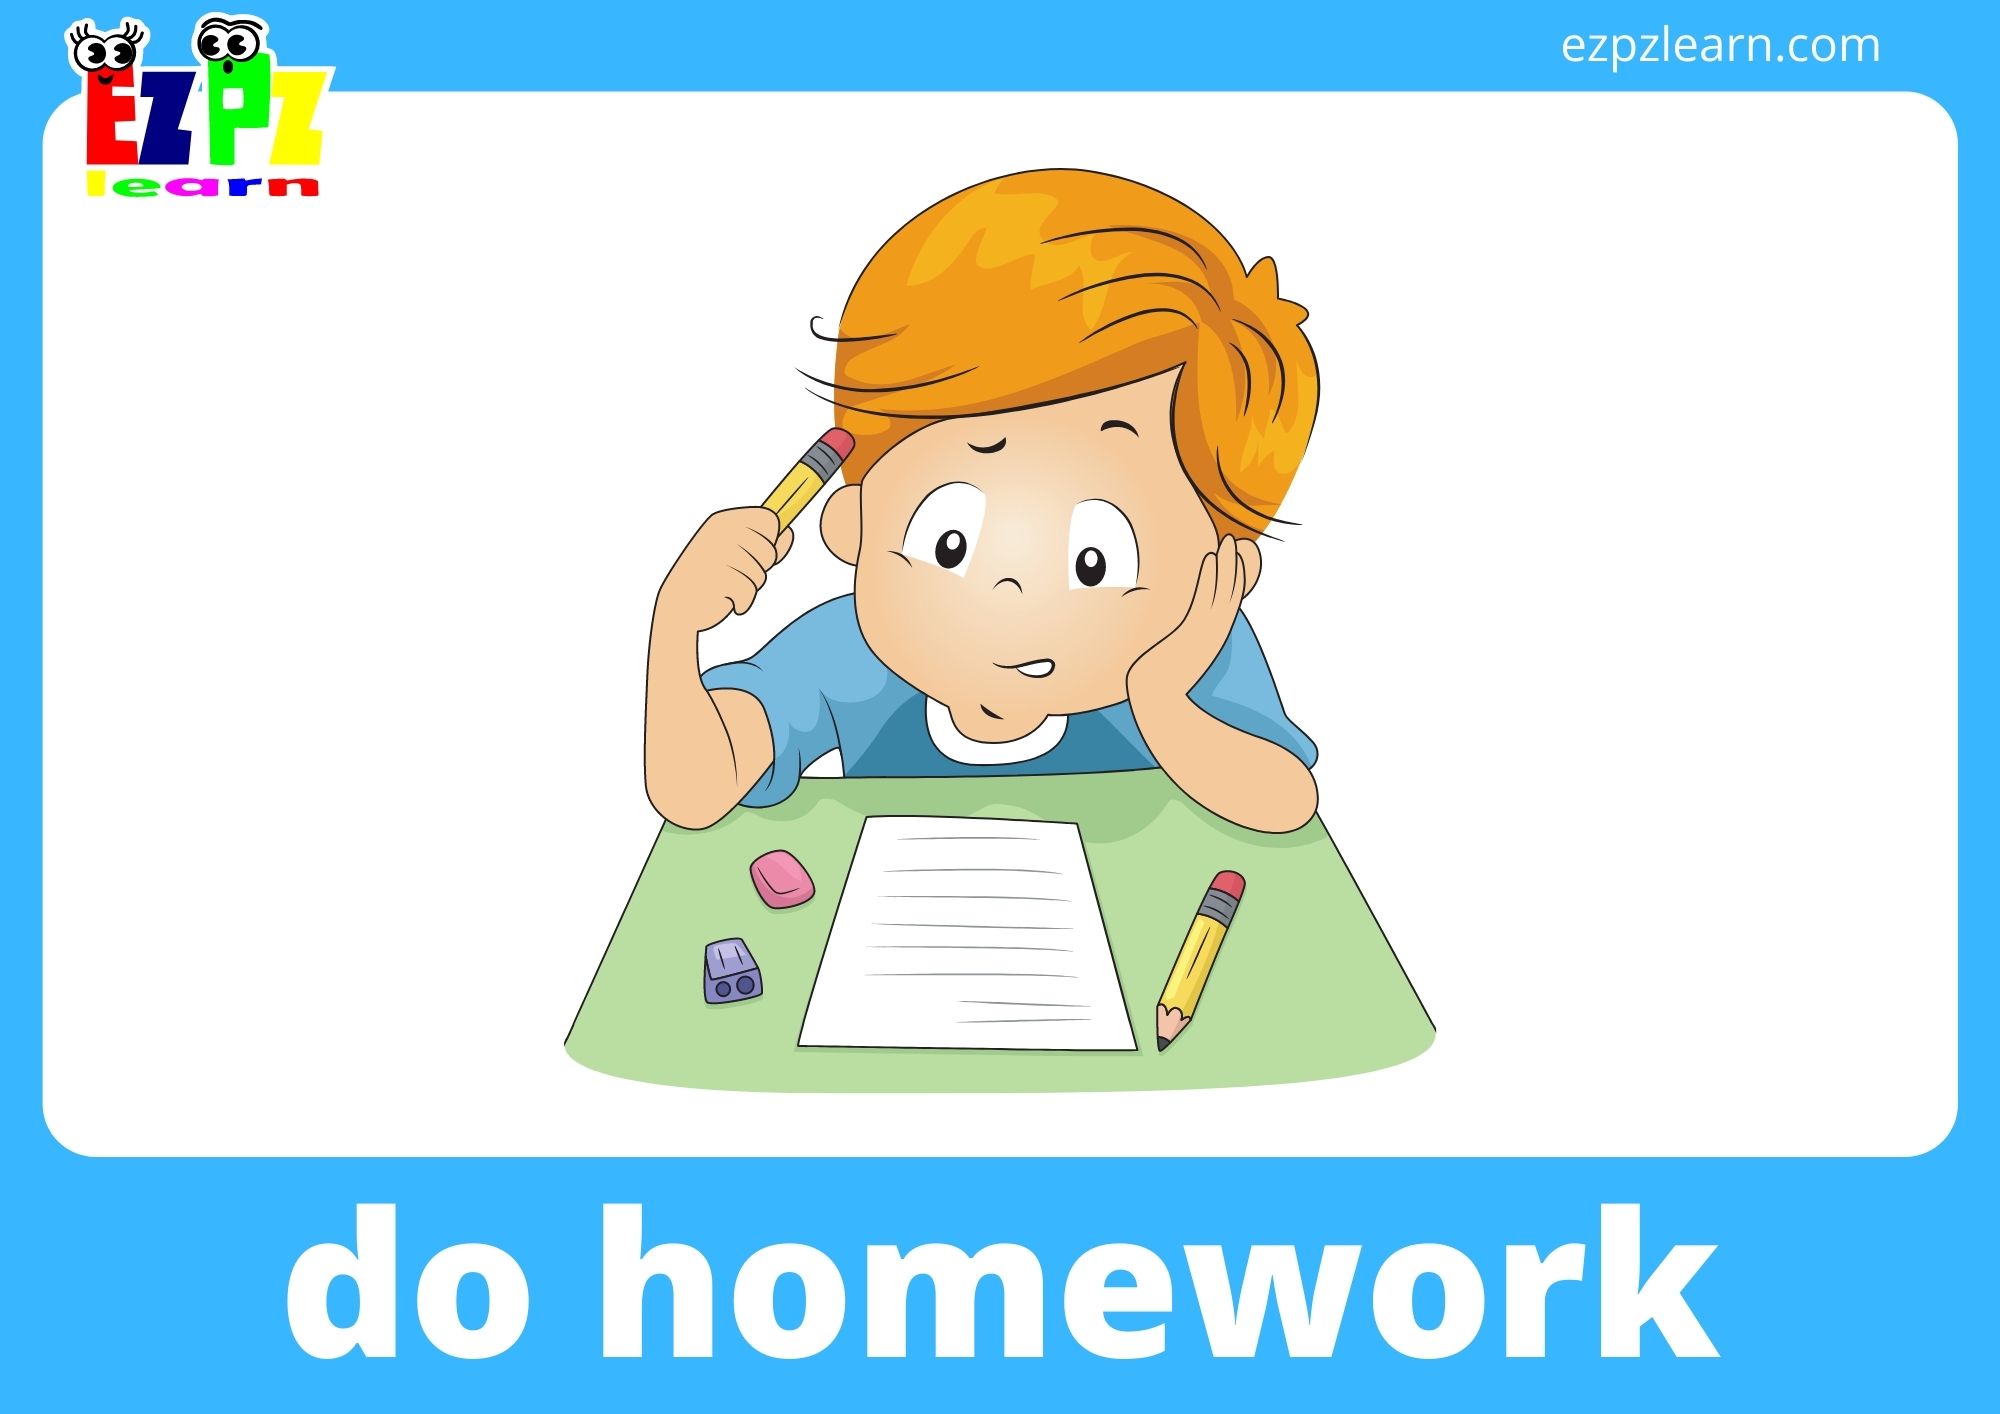 is the word homework a verb